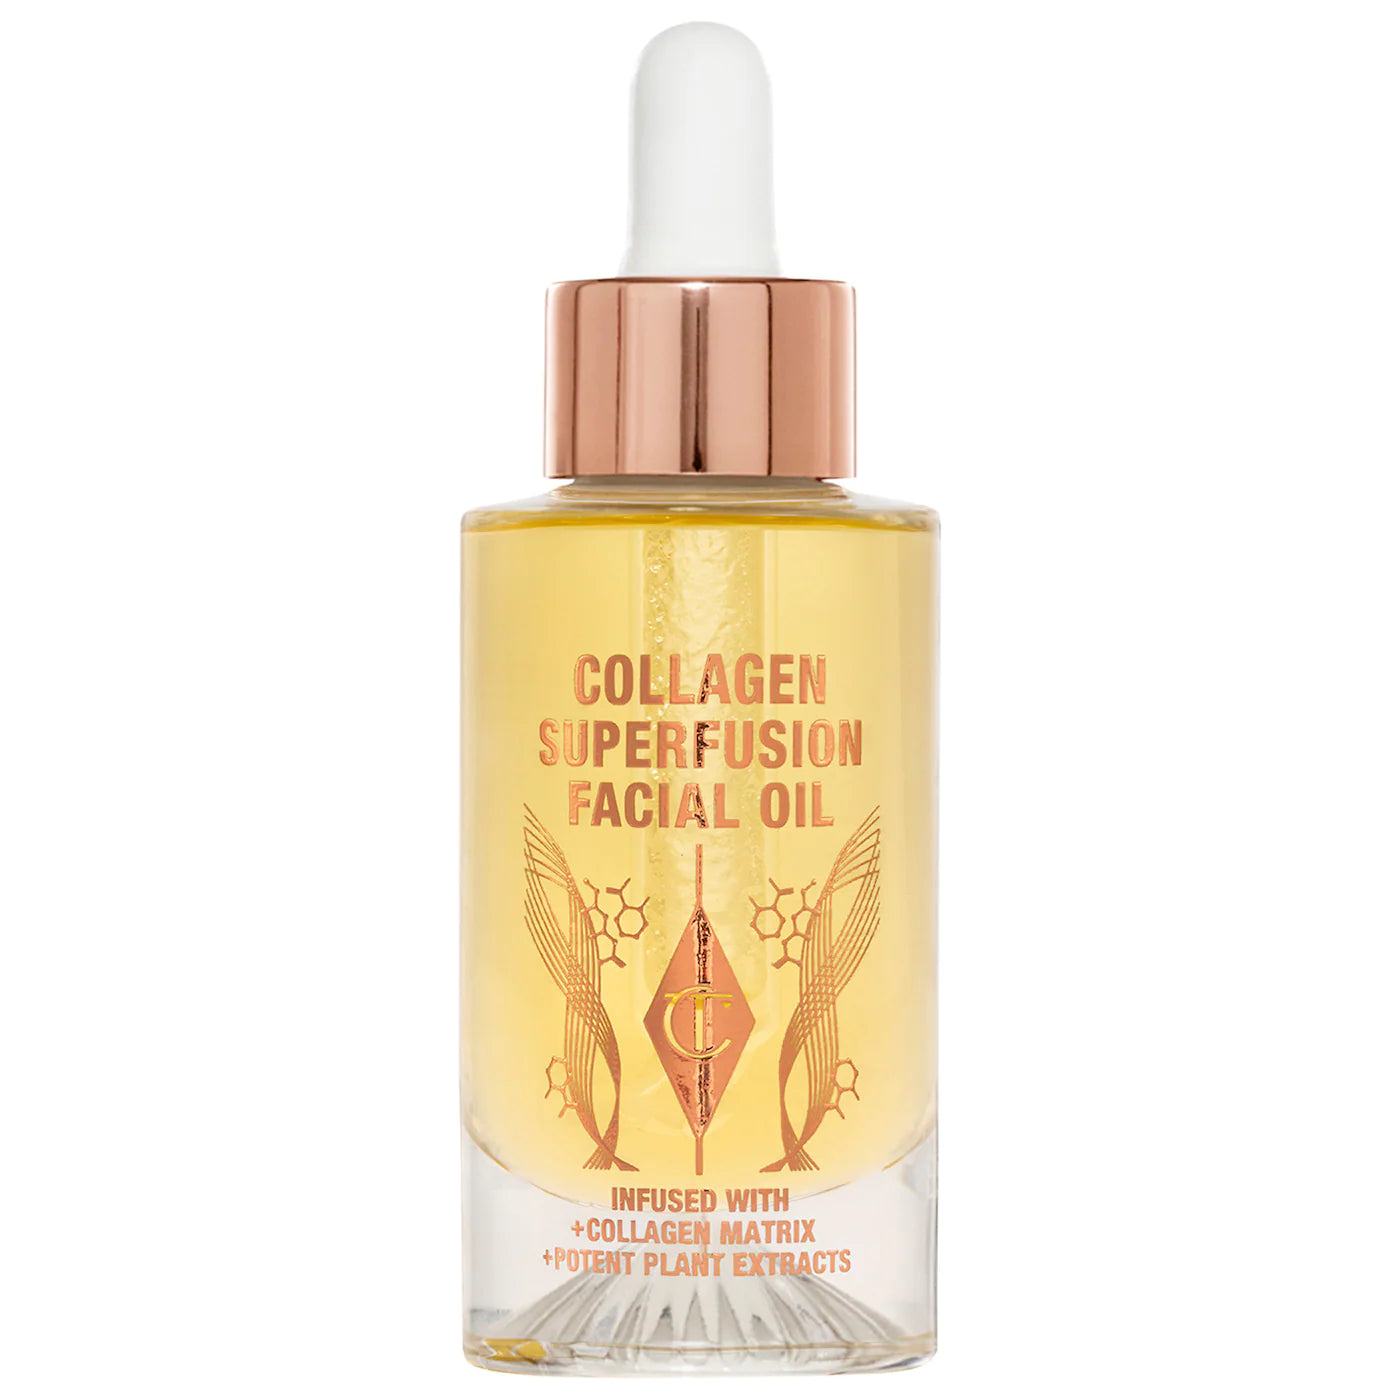 Charlotte Tilbury - Collagen Superfusion Firming & Plumping Facial Oil